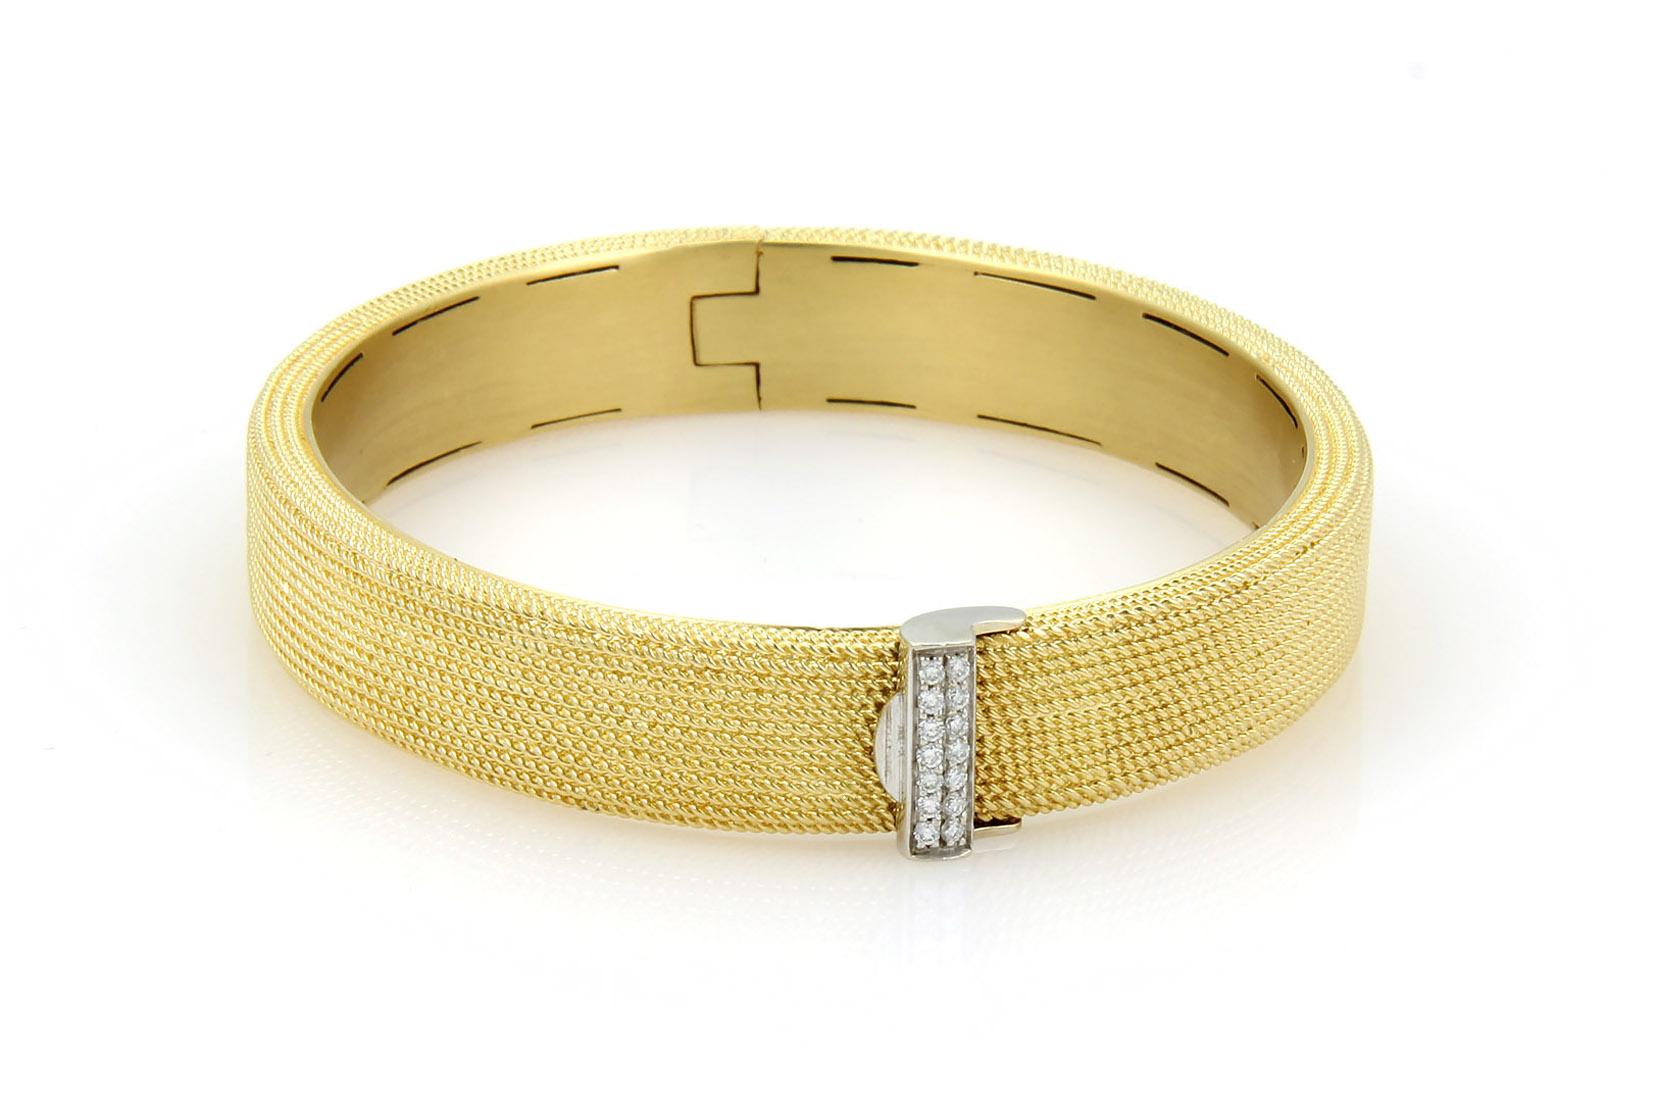 This is a magnificent medium width band bracelet from Roberto Coin, it is well crafted from solid 18k yellow gold with a buckle style clasp in white gold adorned with sparkling round cut diamonds. The band boast a beautiful fine wire textured finish